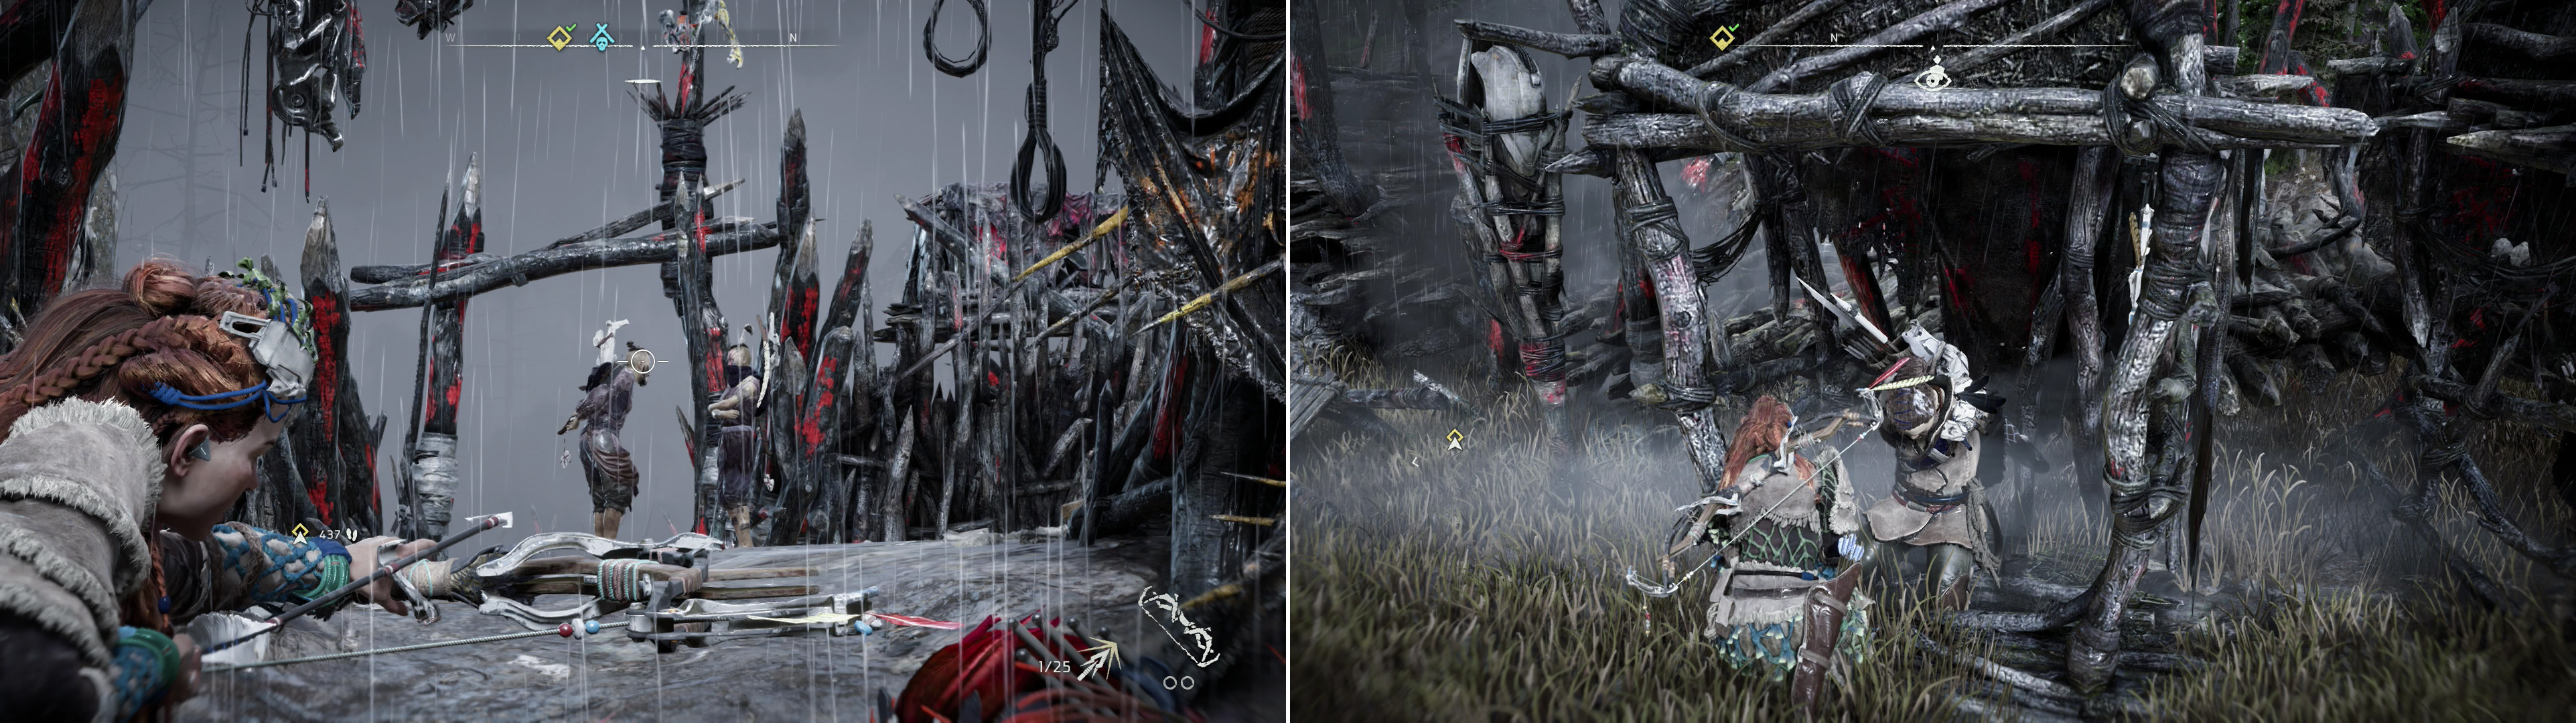 Stalk around the perimeter of the Bandit Camp and put your Sharpshot Bow to deadly use (left). If you want some support, you can always free some prisoners inside the camp (right).